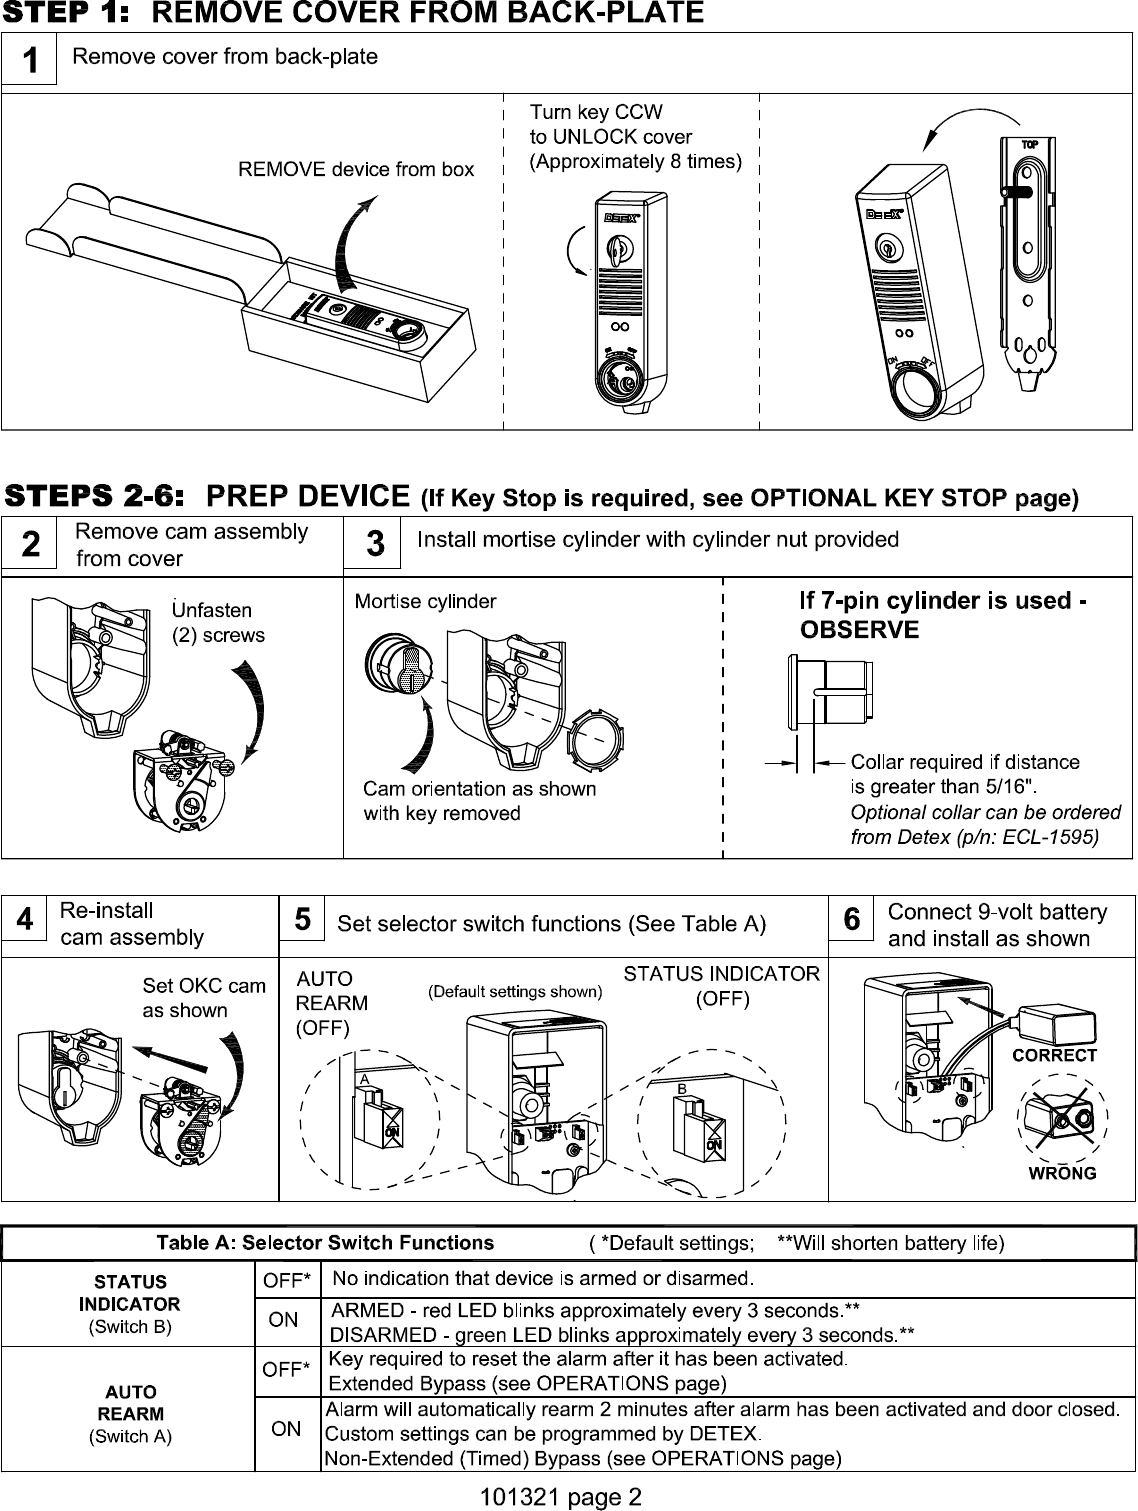 Page 2 of 7 - Detex  EAX-500 Installation Instructions 101321Press Quality